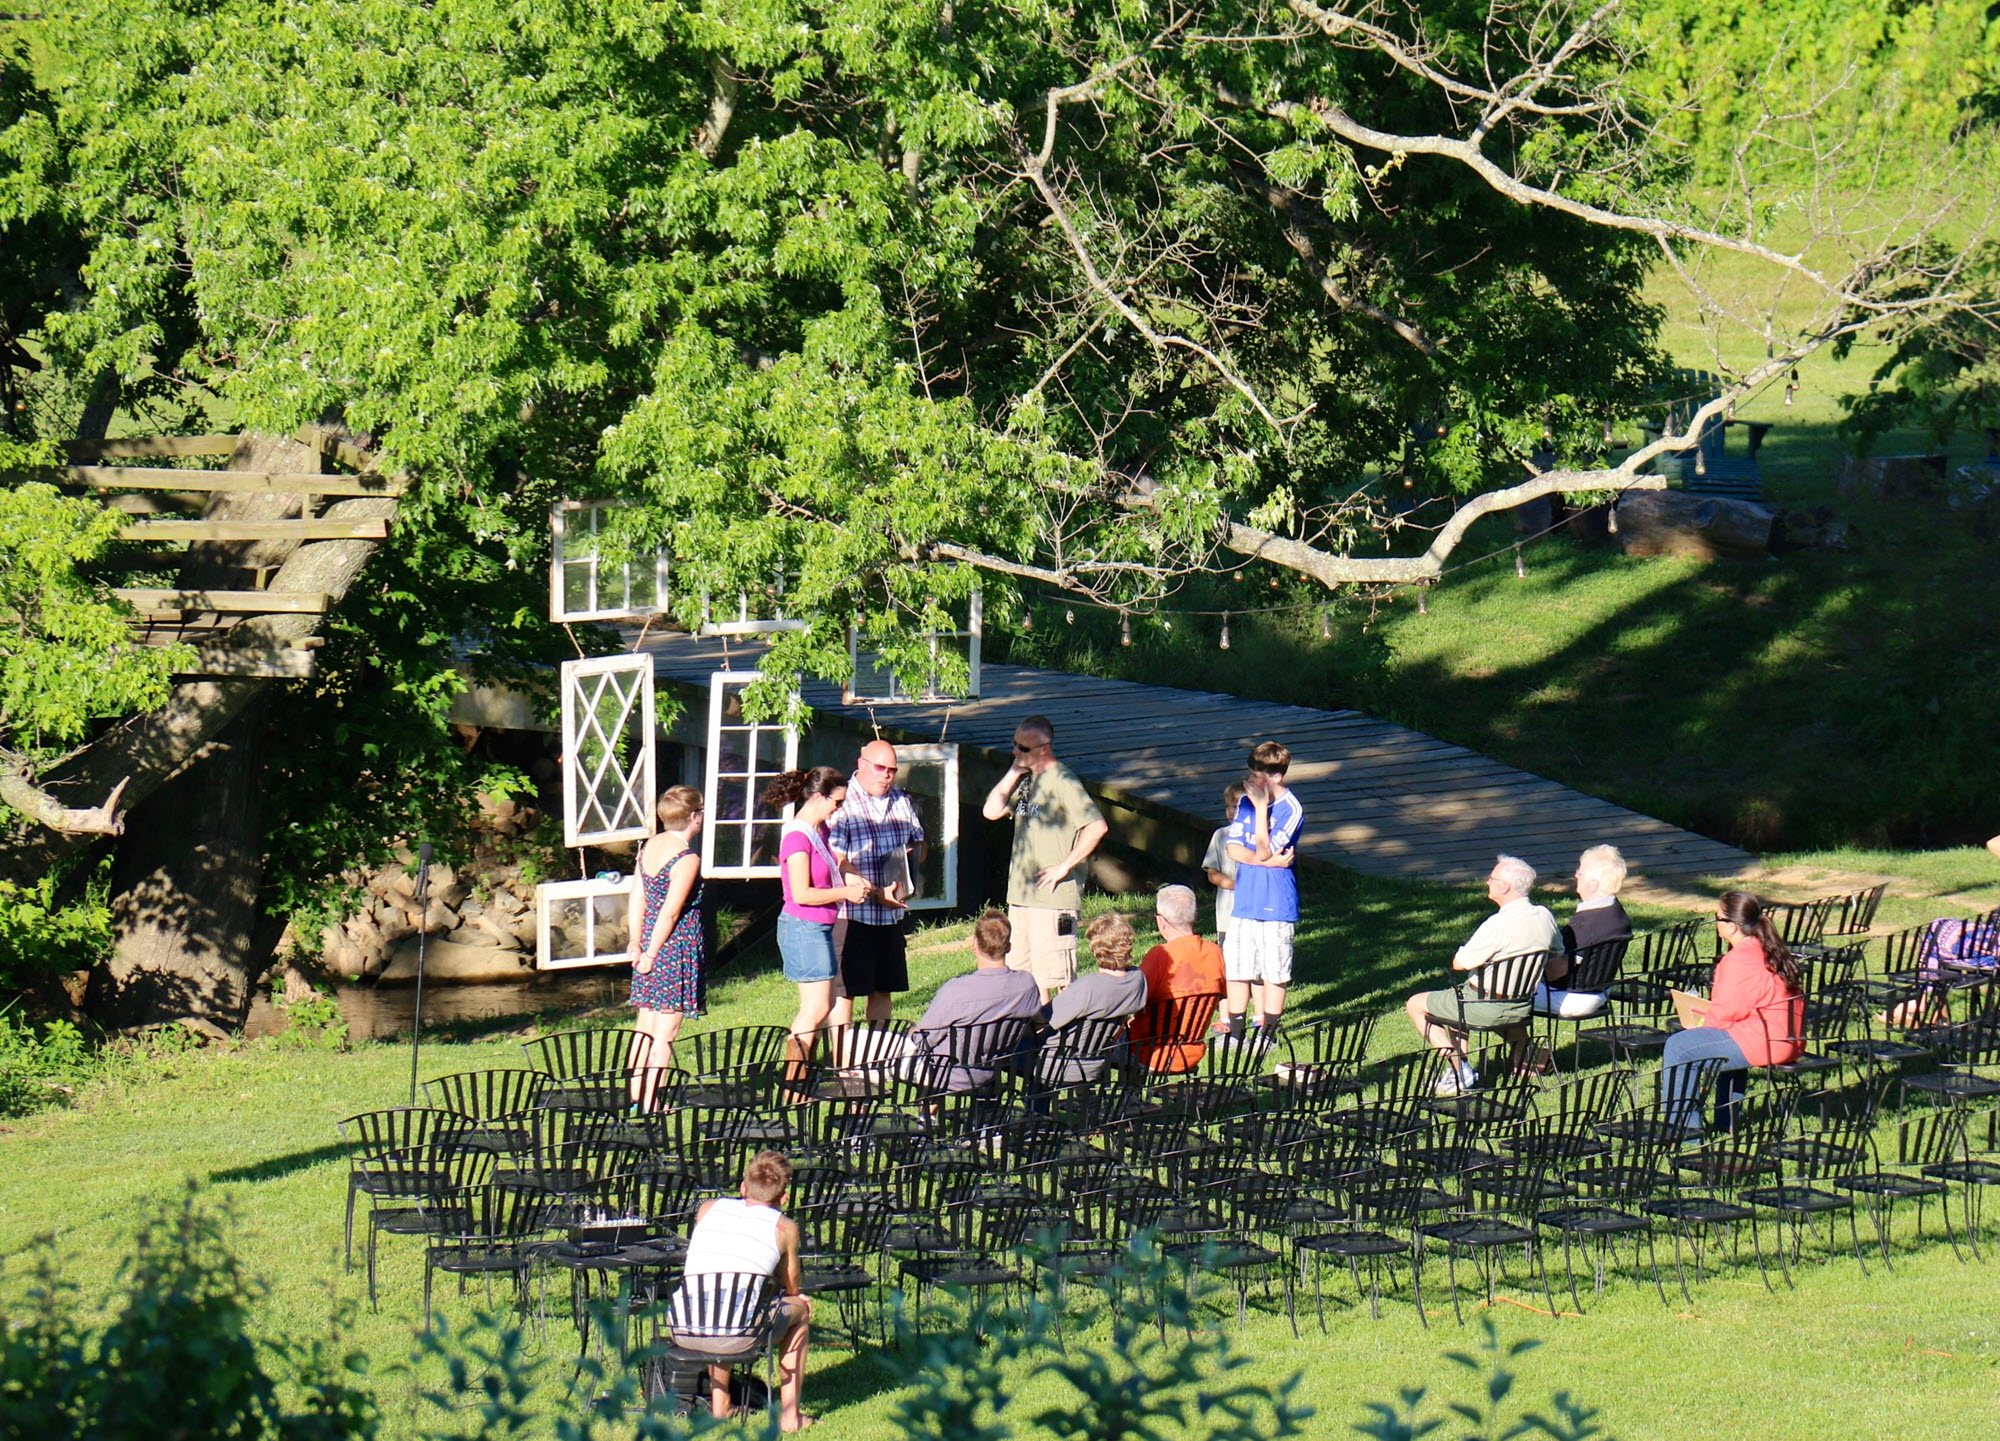 Guests arrange seats on a lush lawn in preparation for a scenic outdoor wedding ceremony.